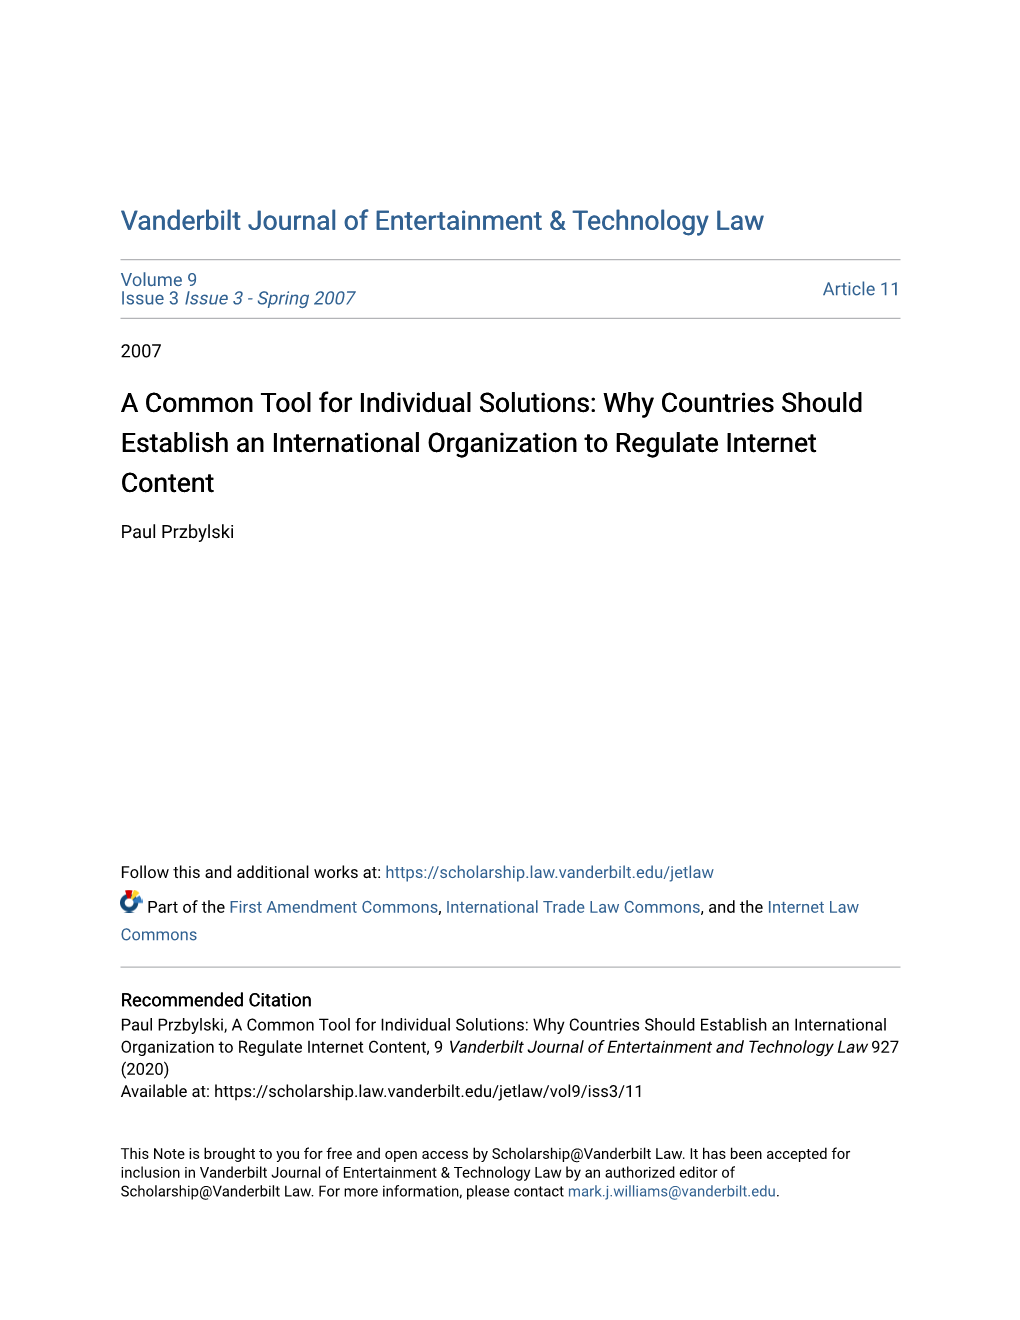 A Common Tool for Individual Solutions: Why Countries Should Establish an International Organization to Regulate Internet Content